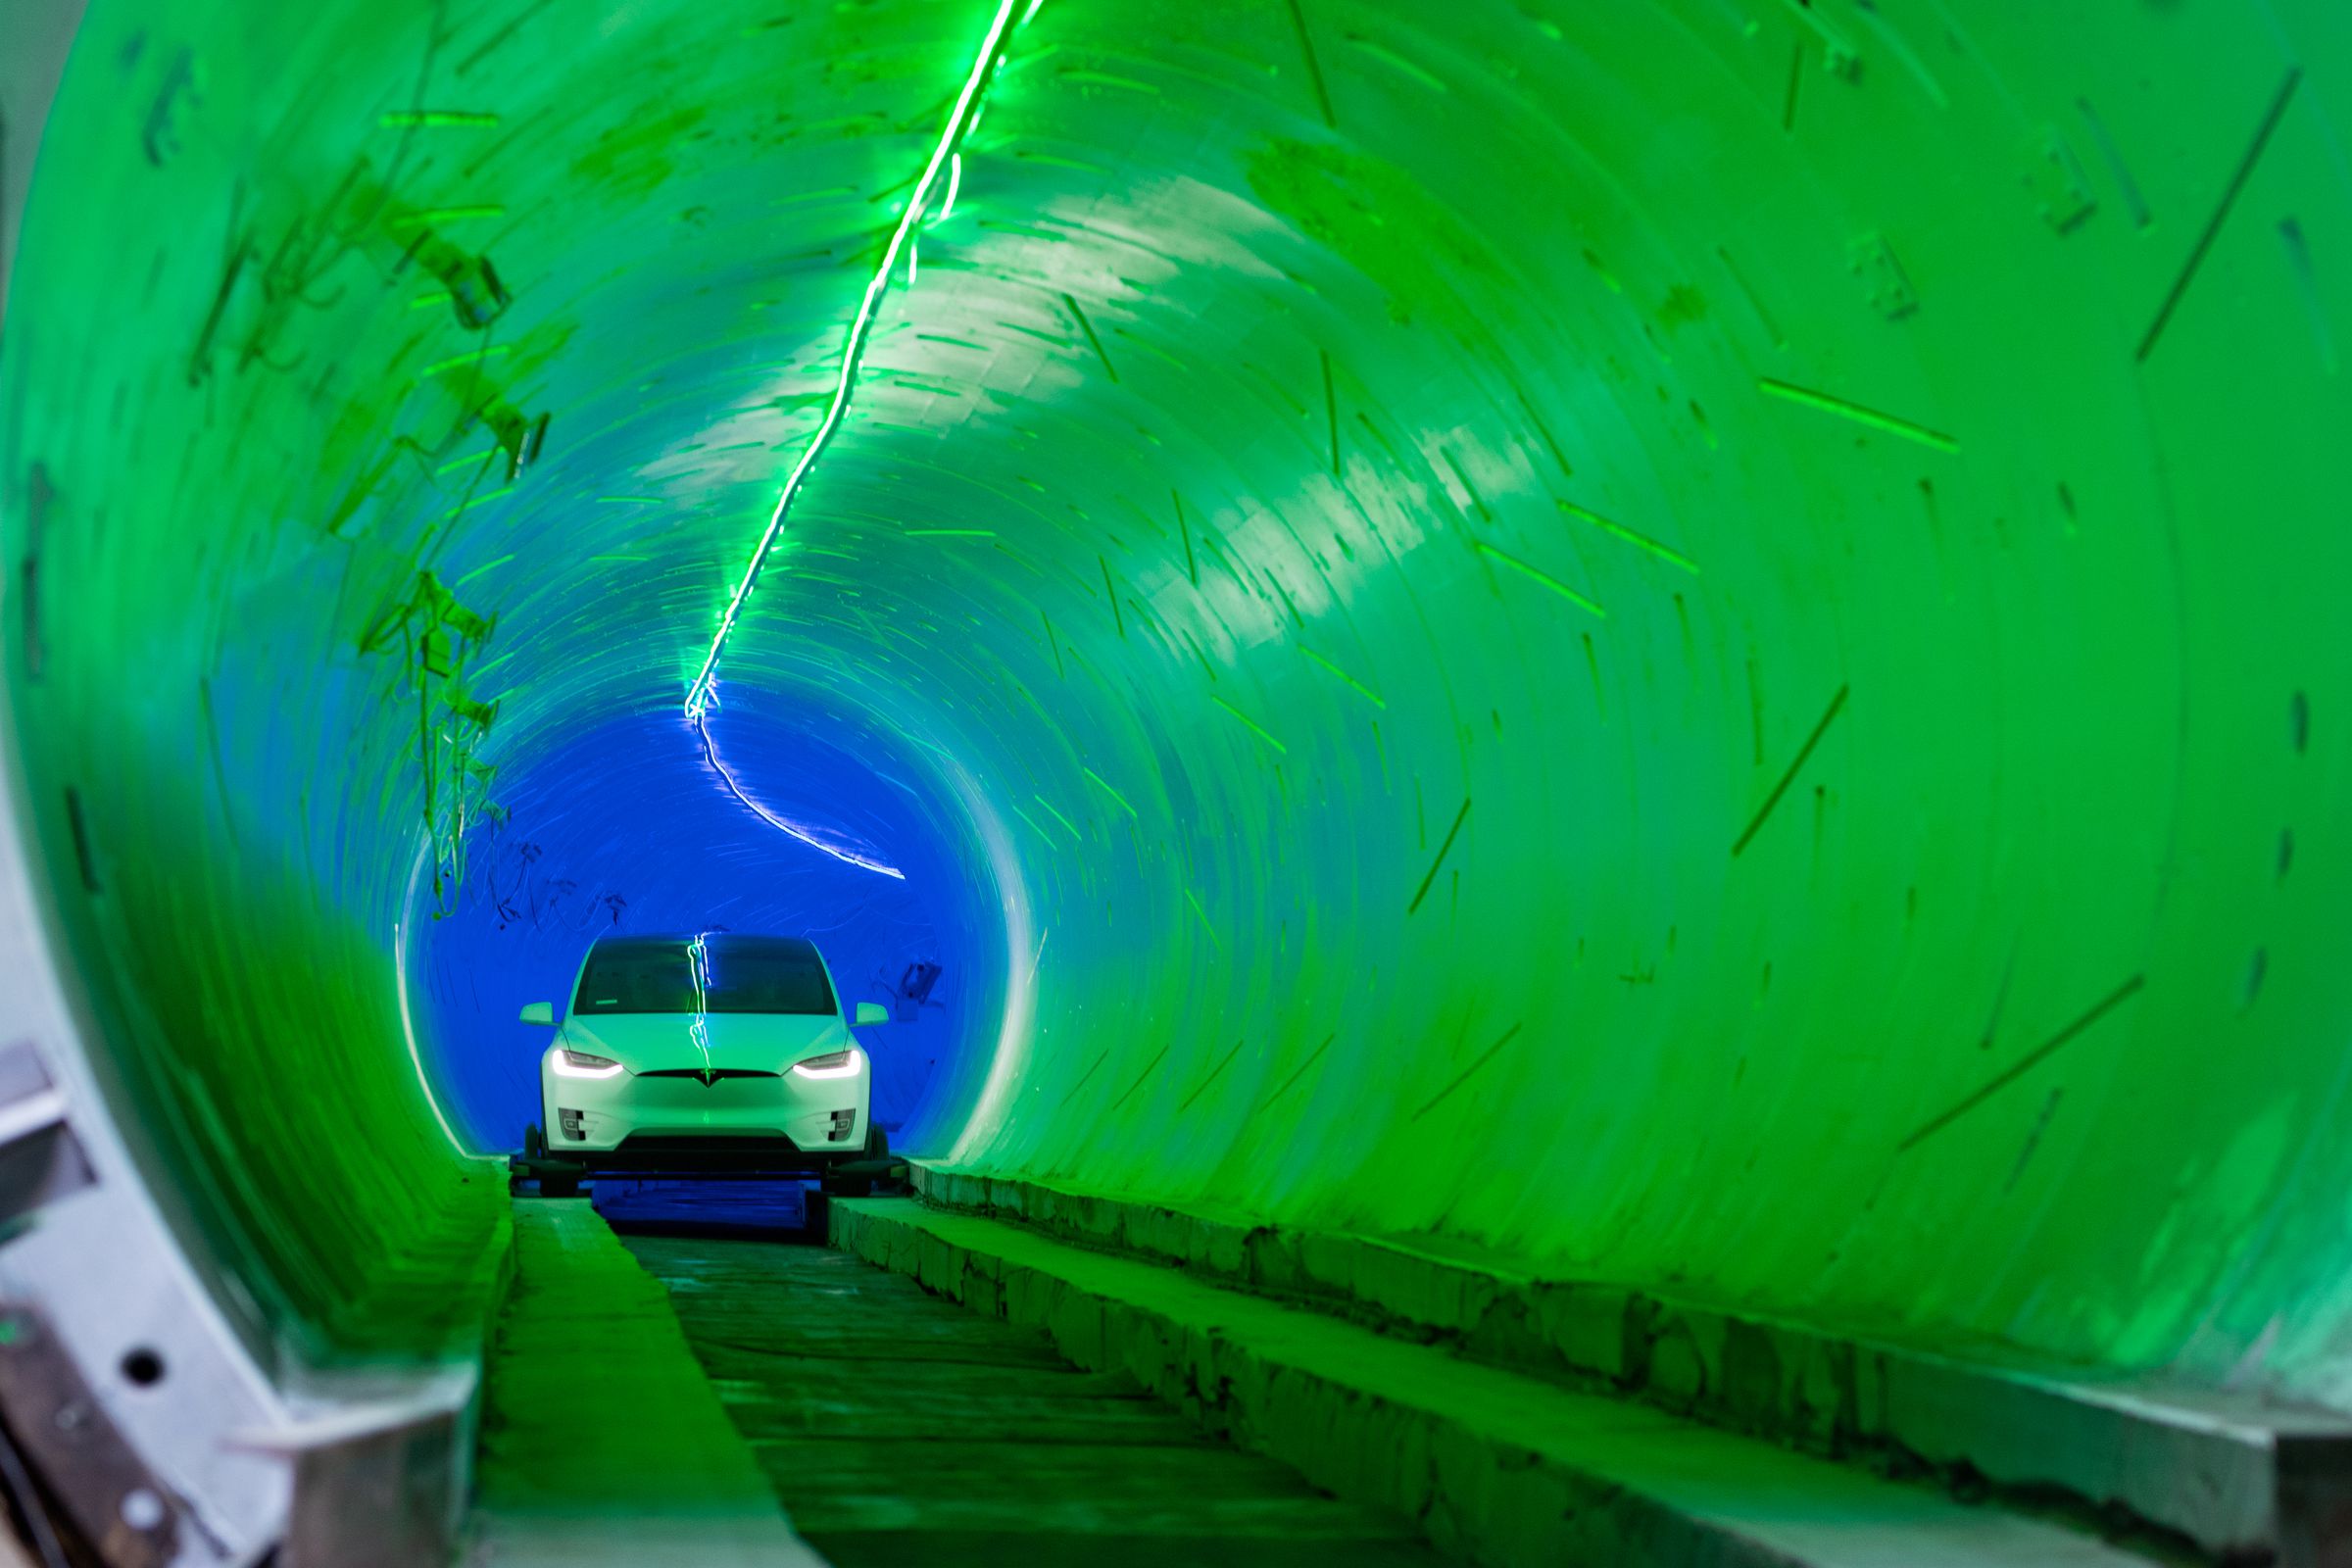 Beyond the green lights at the tunnel entrance, the blue lights of the tunnel midsection appear